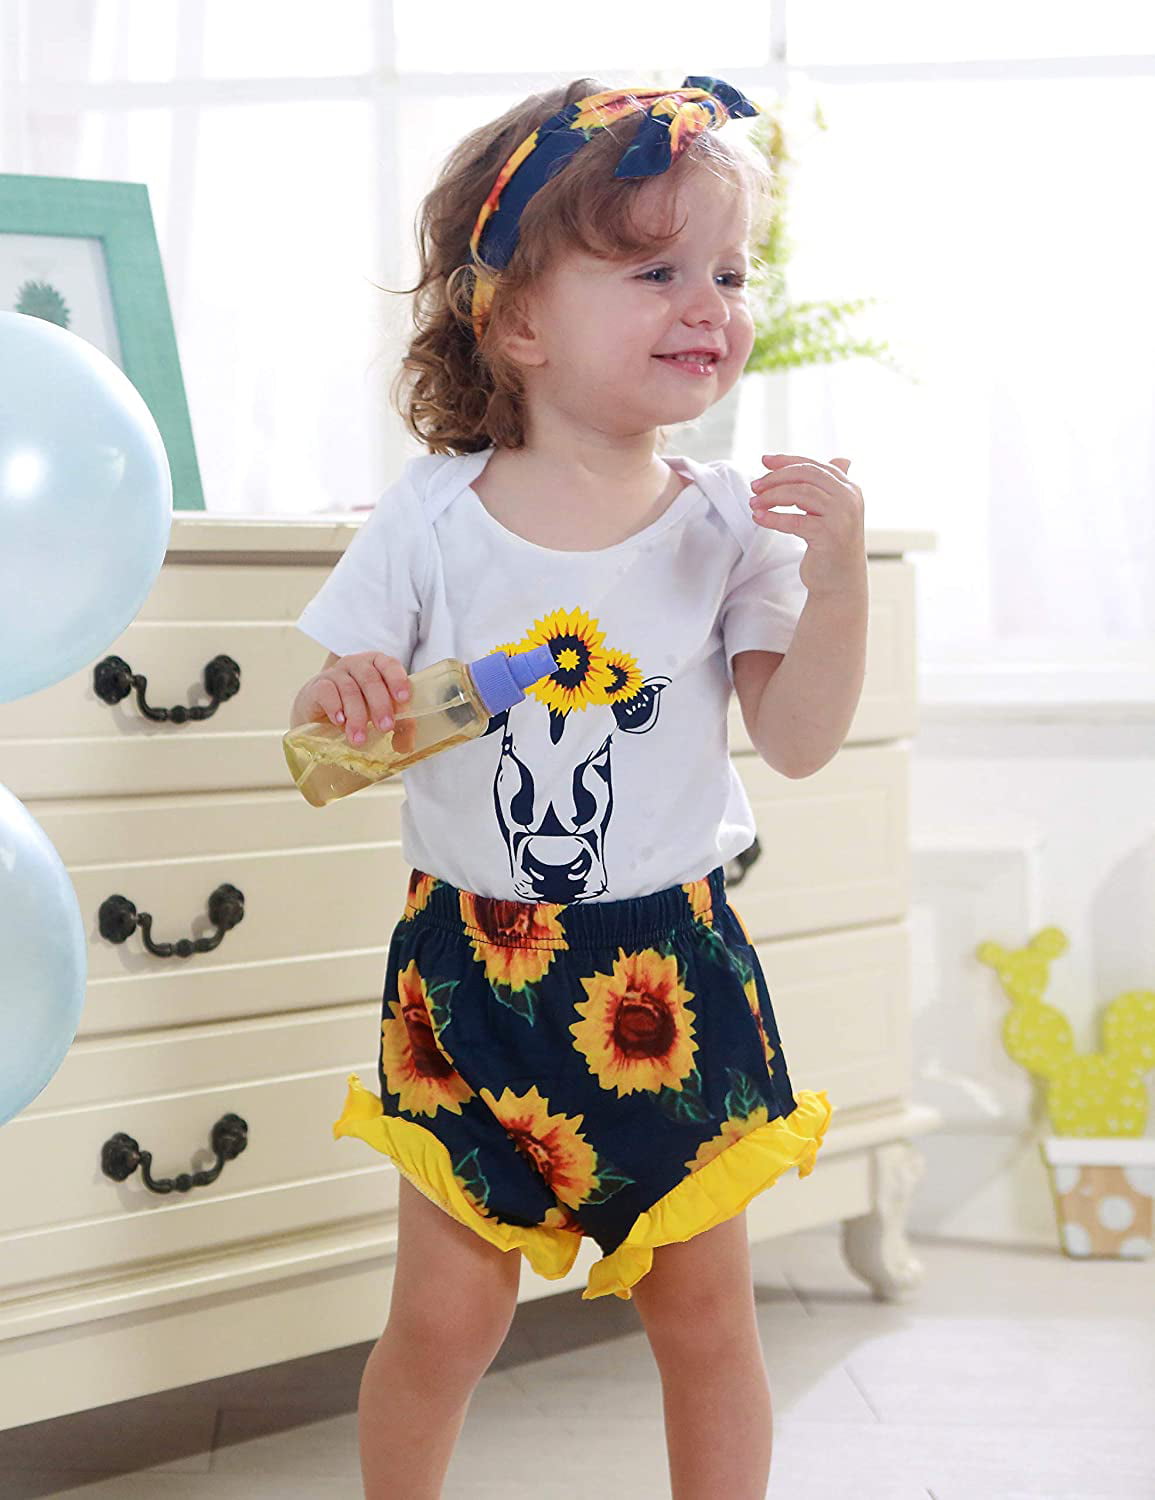 Newborn Baby Girl Clothes Sunflower Wild Ox Romper Floral Pants with Headband 3Pcs Summer Outfit Set 0-18Months